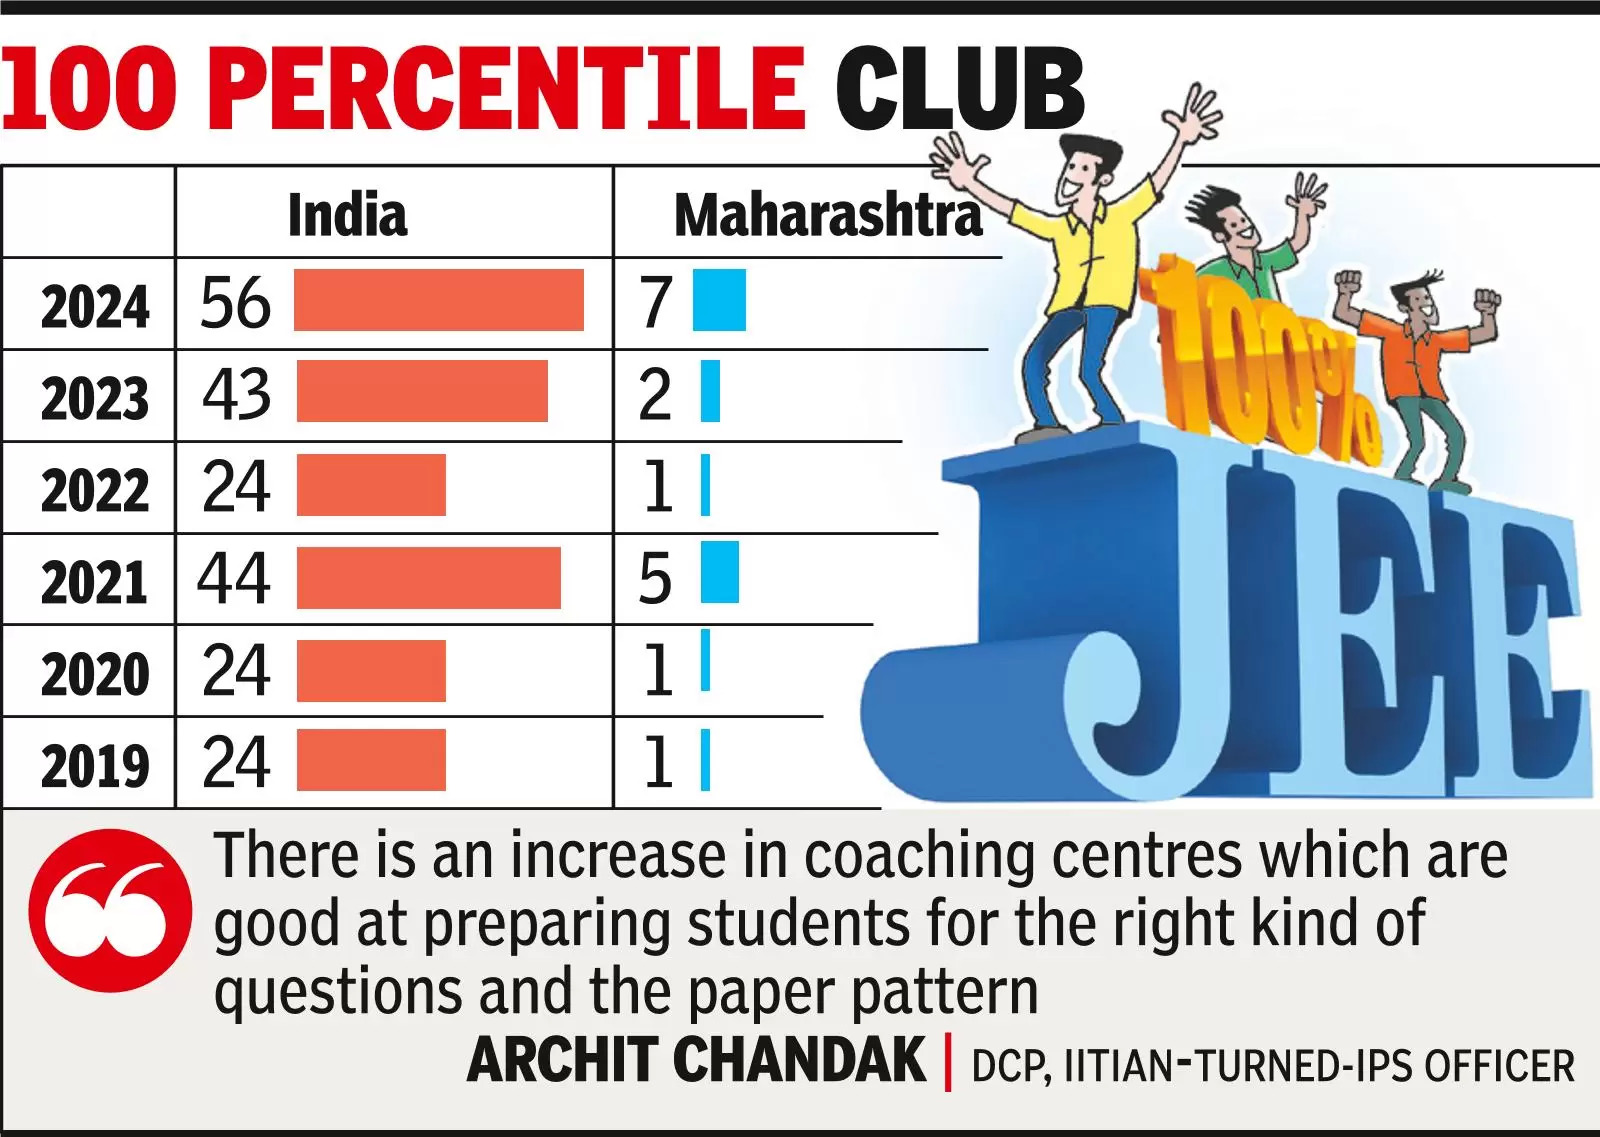 More climb to the pinnacle: From just 1 in 2019, JEE Mains perfect scorers shoot to 7 in Maha